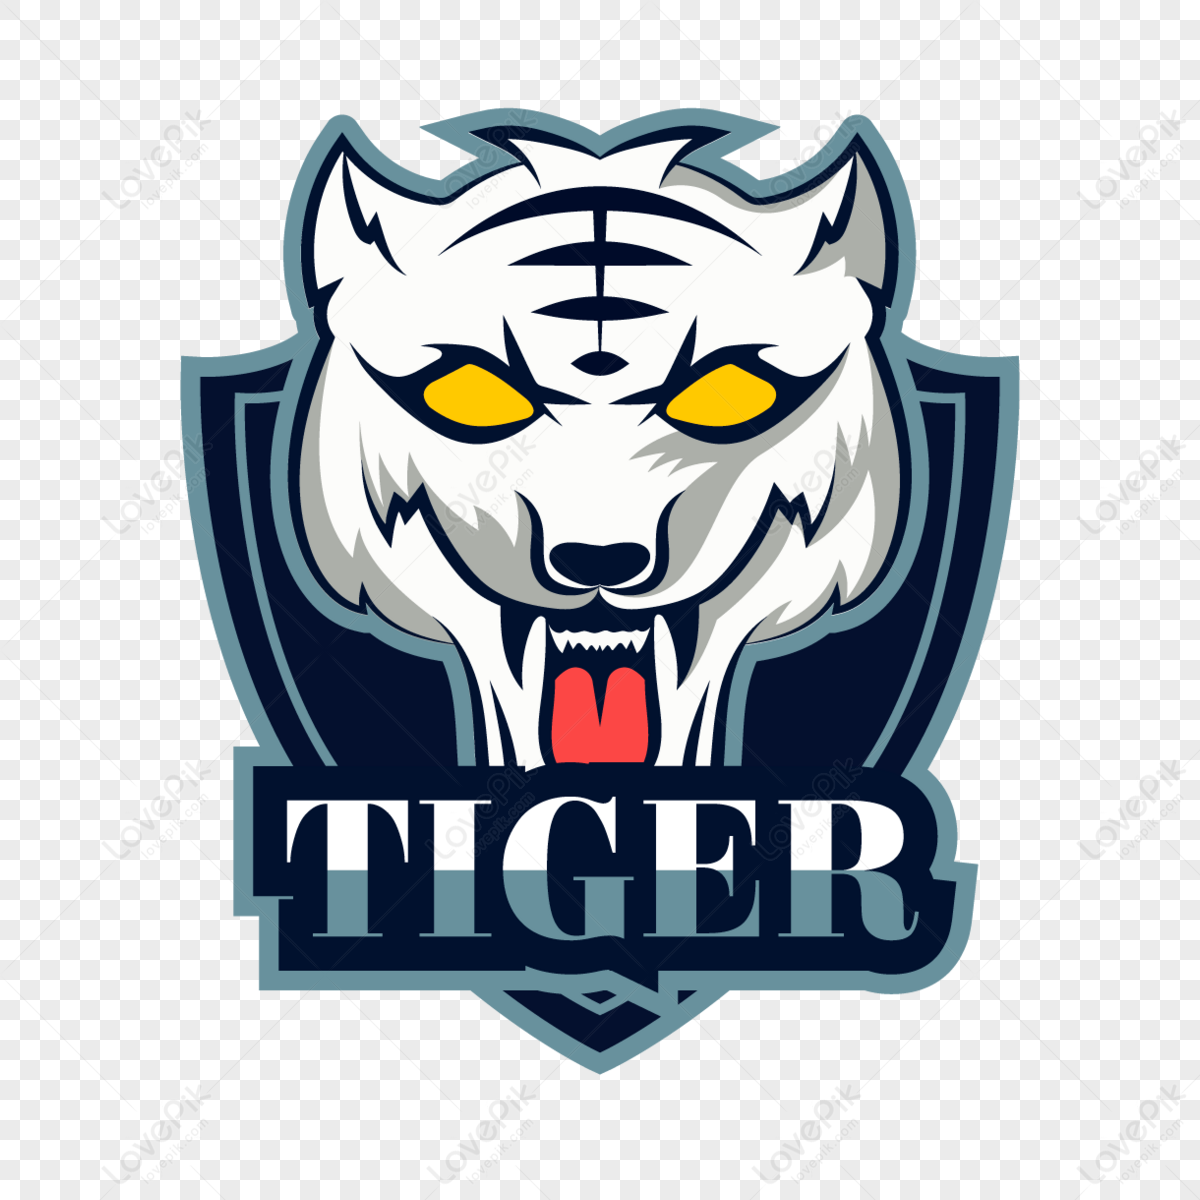 Smoky Vector Art PNG, Smoky Tiger Logo, Africa, Angry, Animal PNG Image For  Free Download